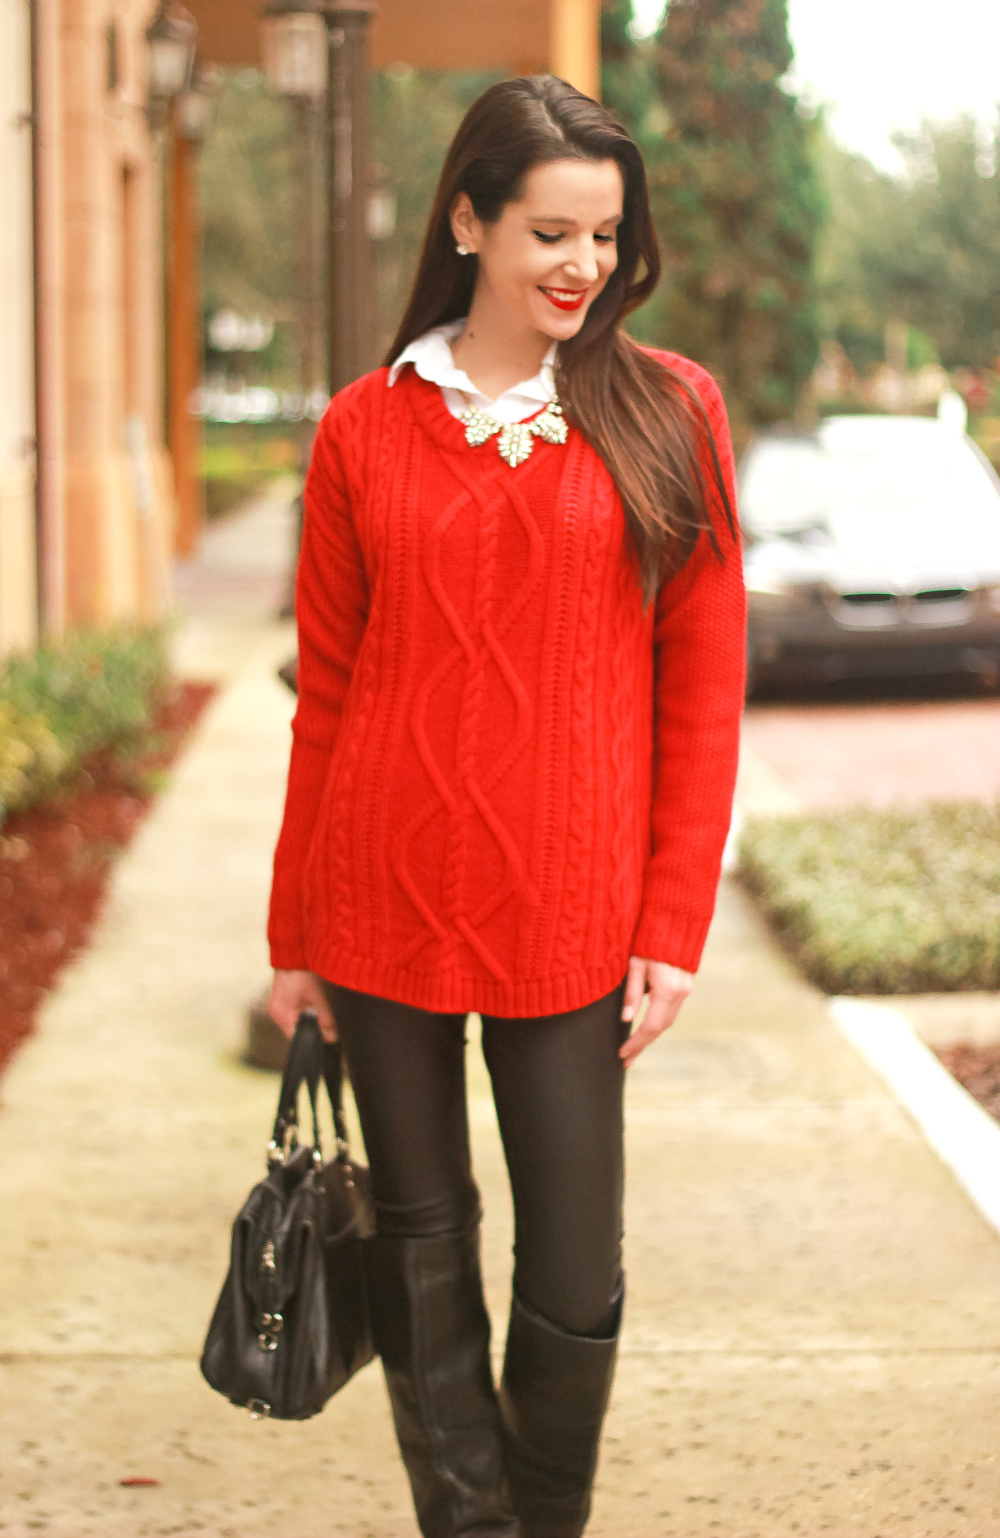 Oversized Red Cable Knit Sweater, Red Cable Knit Sweater, Holiday Outfit, Casual Sweater Outfit, Stephanie Ziajka, Diary of a Debutante